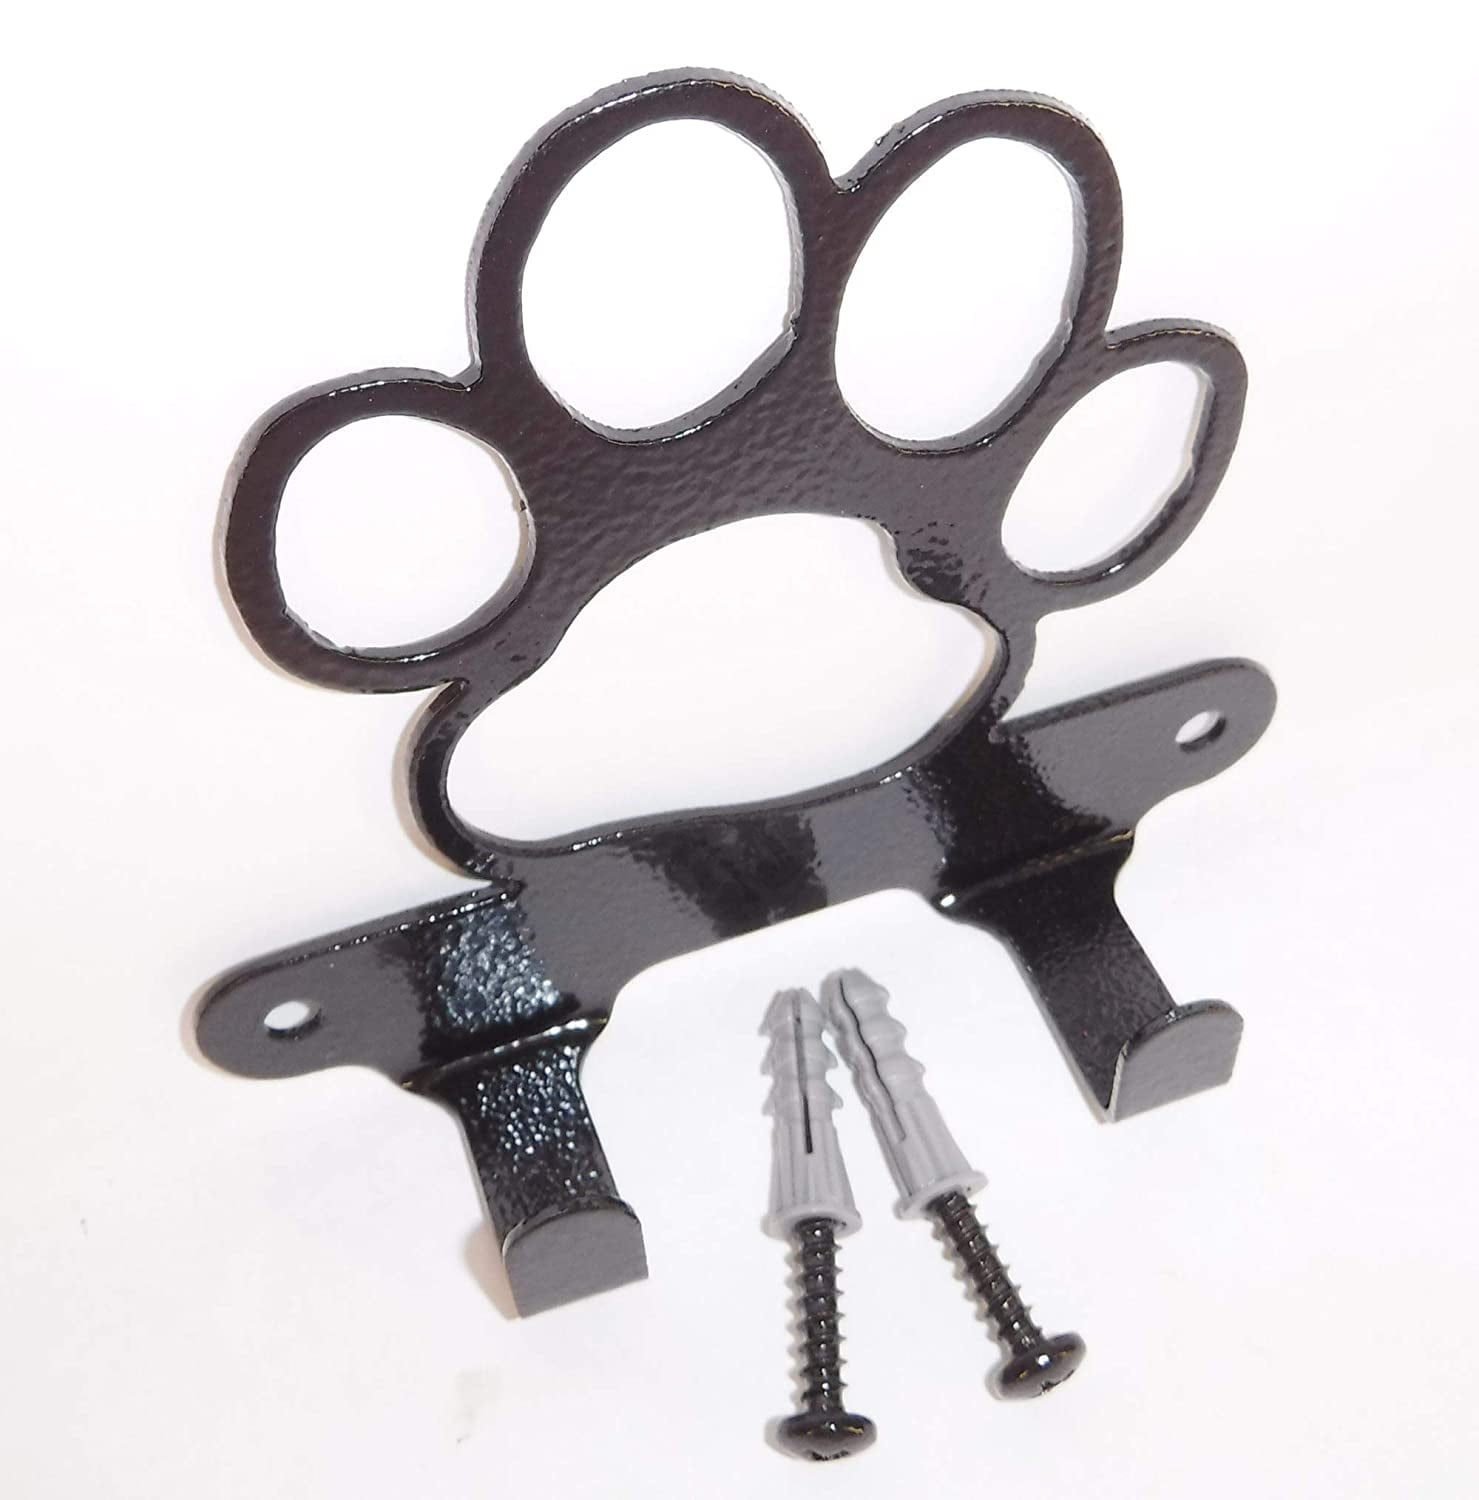 Dog Paw Gloss Black Color Screws Included. Dog Leash Hook Hanger Solid Steel Made in USA 